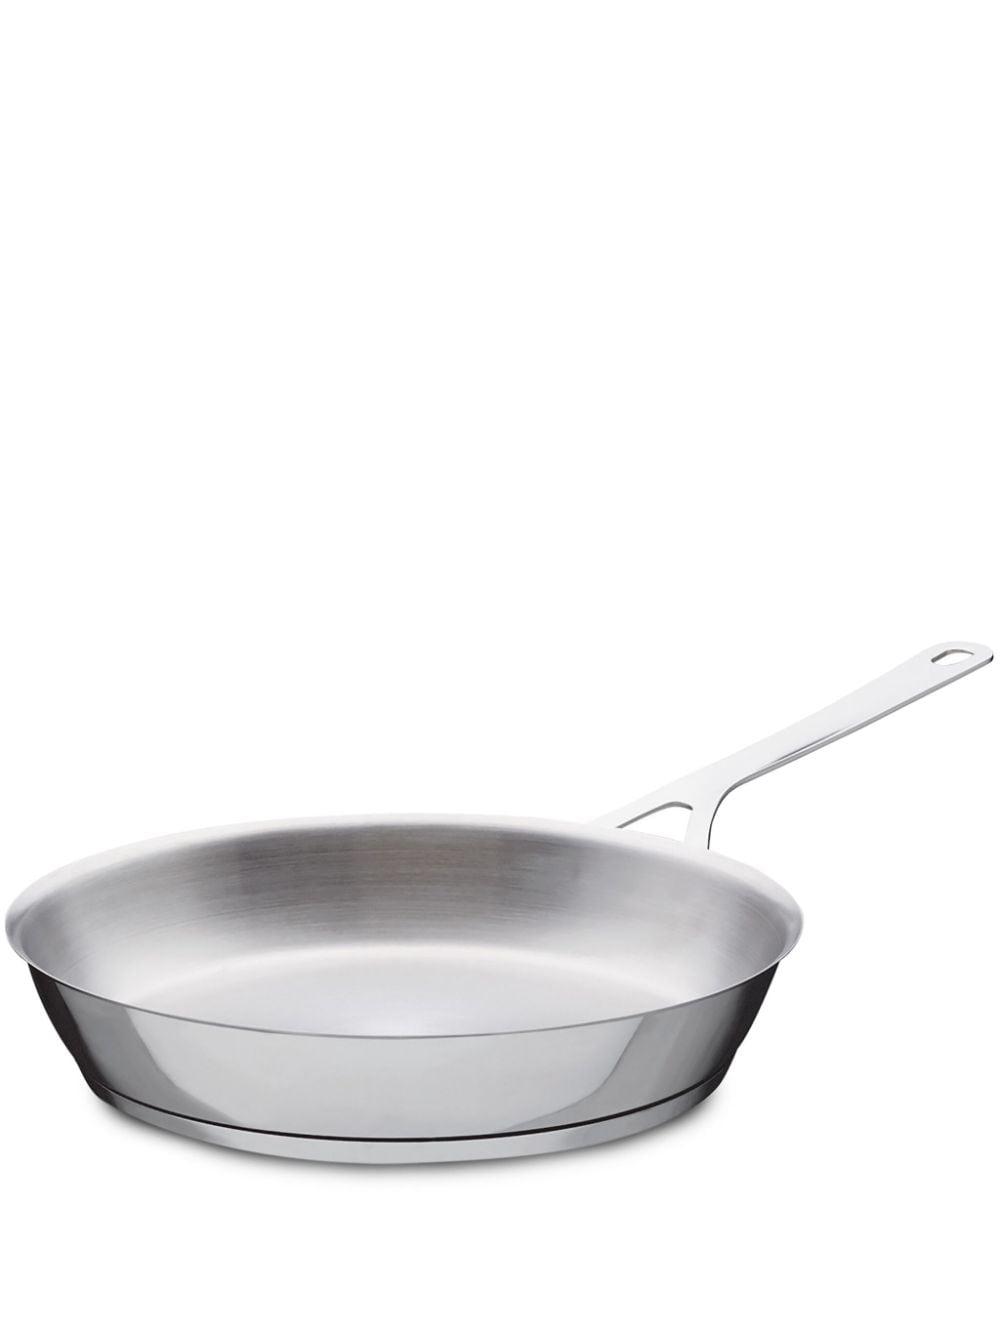 Alessi Pots&pans Stainless Steel Frying Pan In Silver